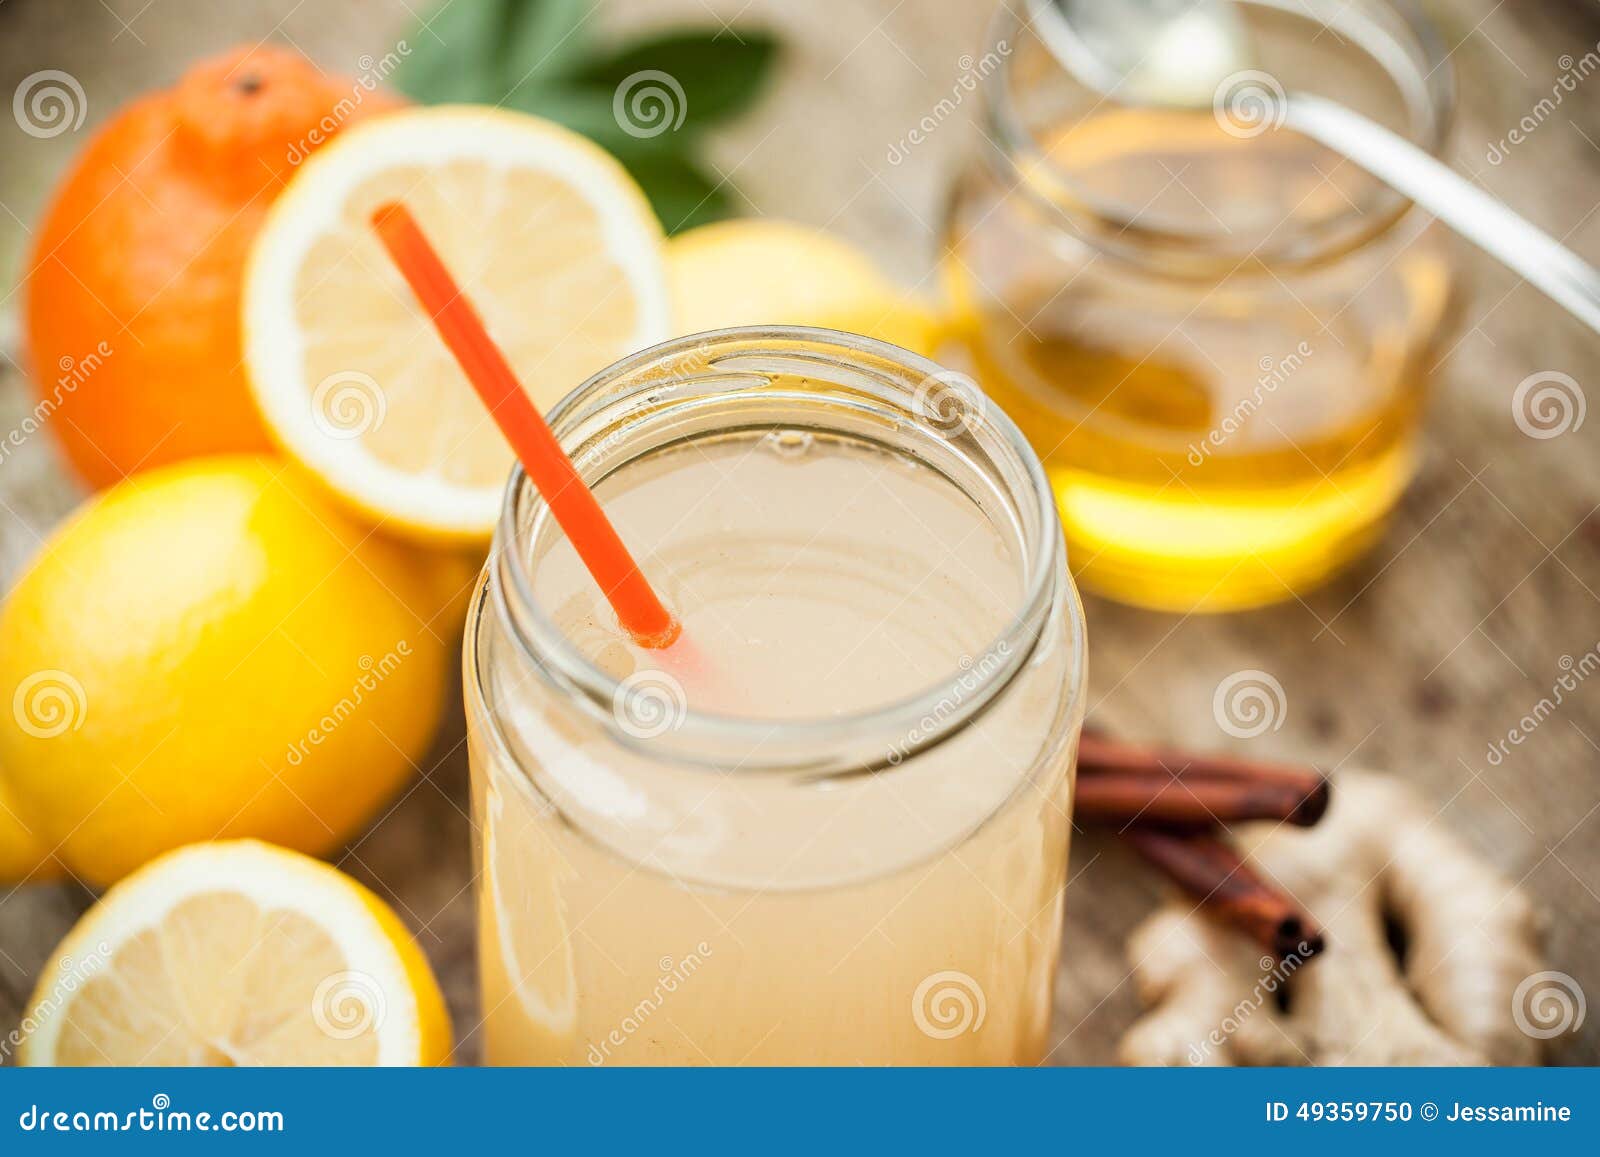 healthy drink made of lemon, cinammon, ginger and honey